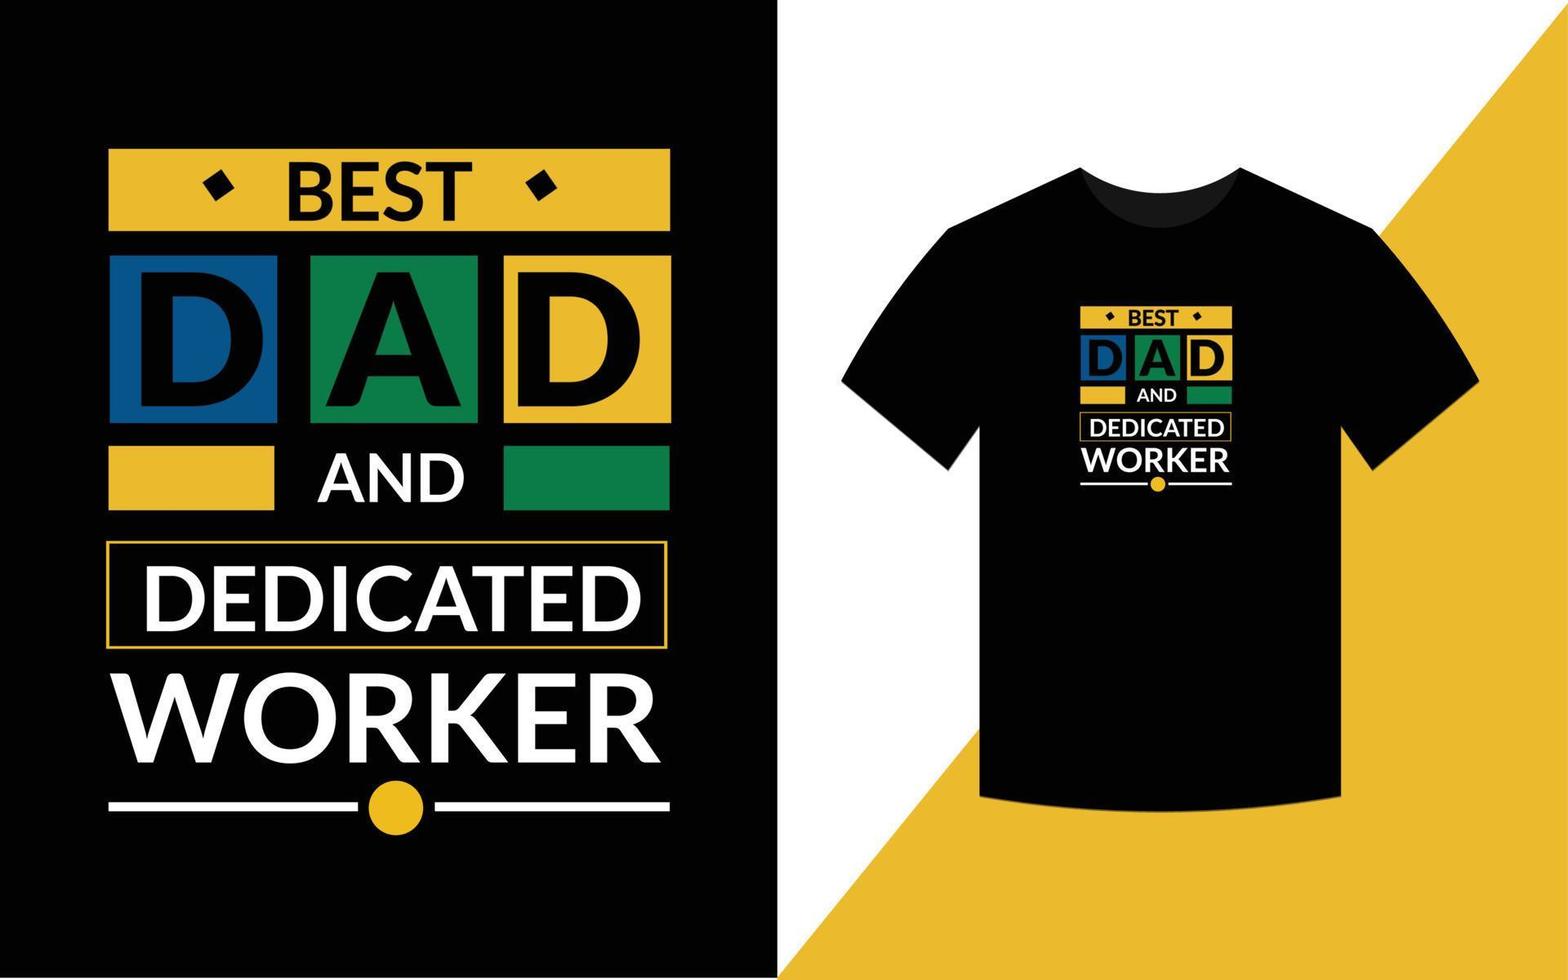 Best dad and dedicated worker Typography Inspirational Quotes t shirt design for fashion apparel printing. vector